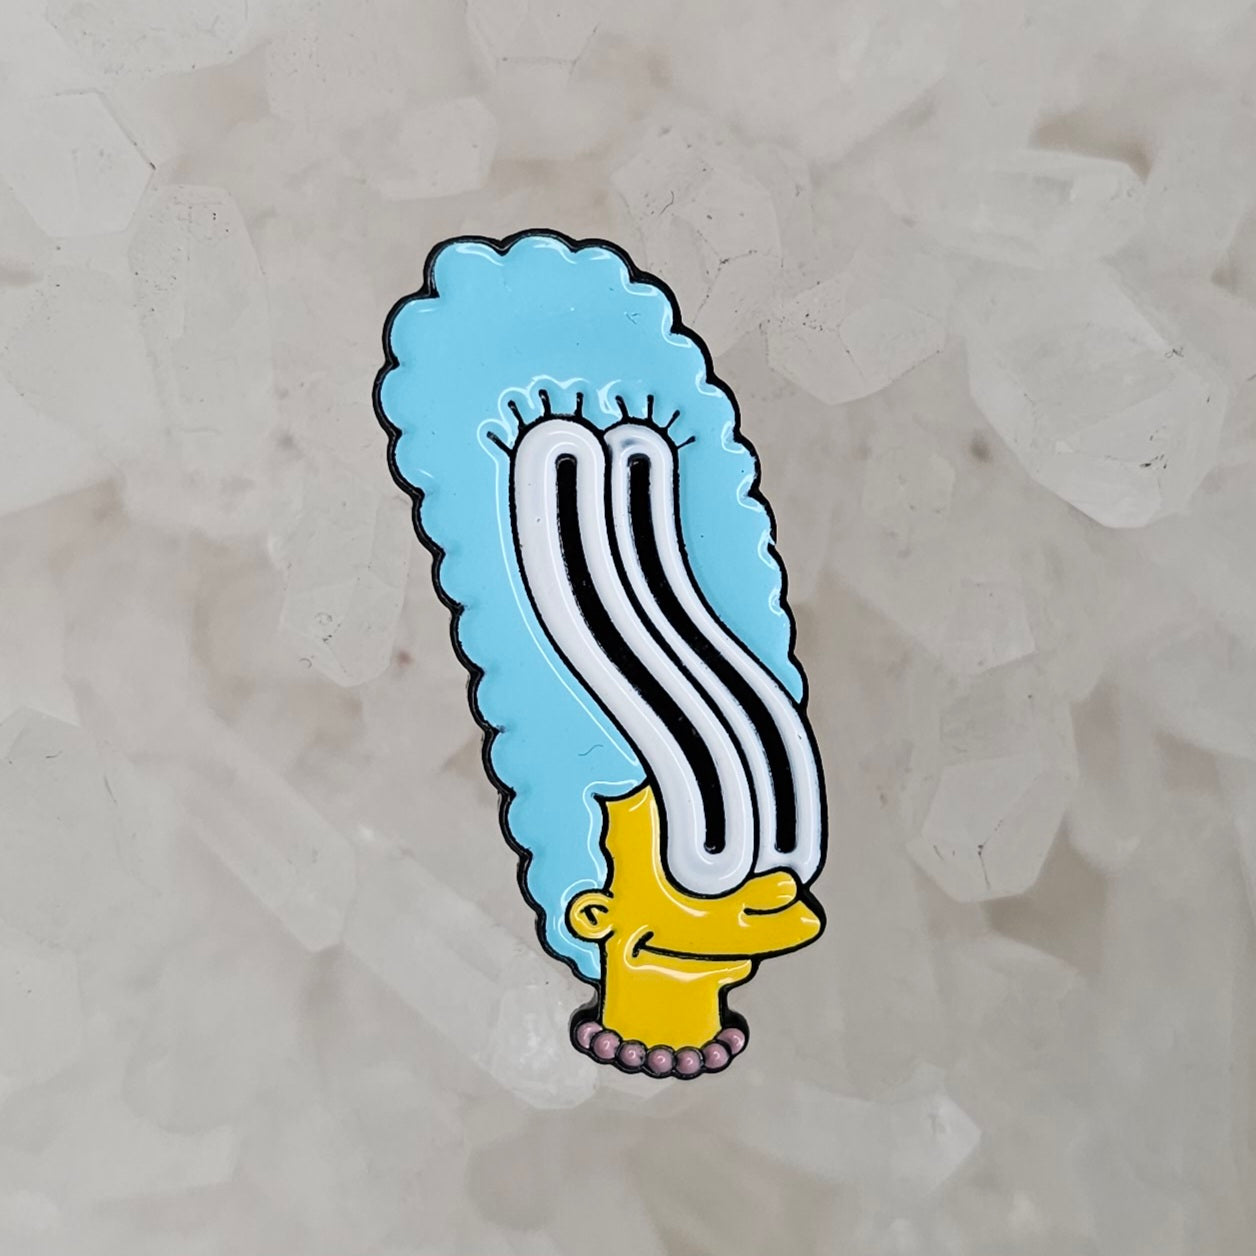 Trippy Marge Psychedelic Simpson 90s Cartoon Tv Enamel Pins Hat Pins Lapel Pin Brooch Badge Festival Pin